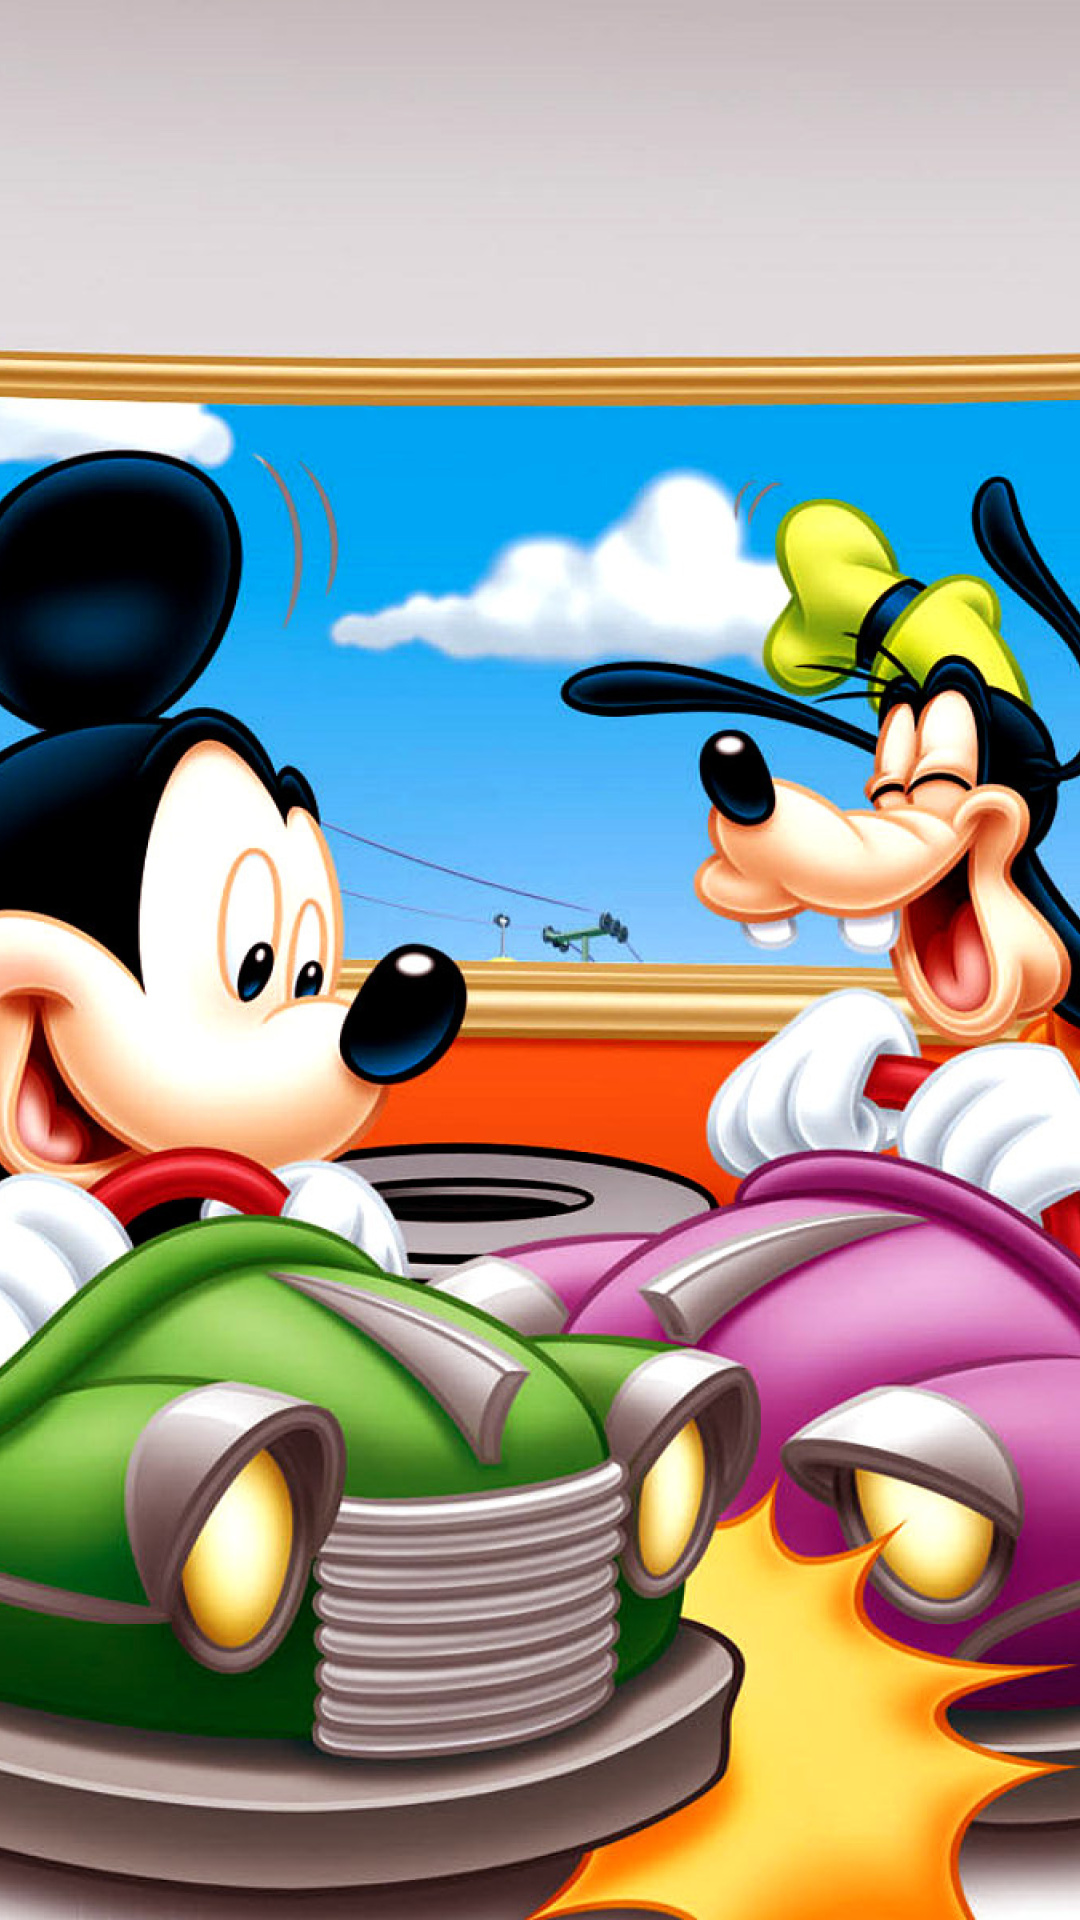 Mickey Mouse in Amusement Park wallpaper 1080x1920